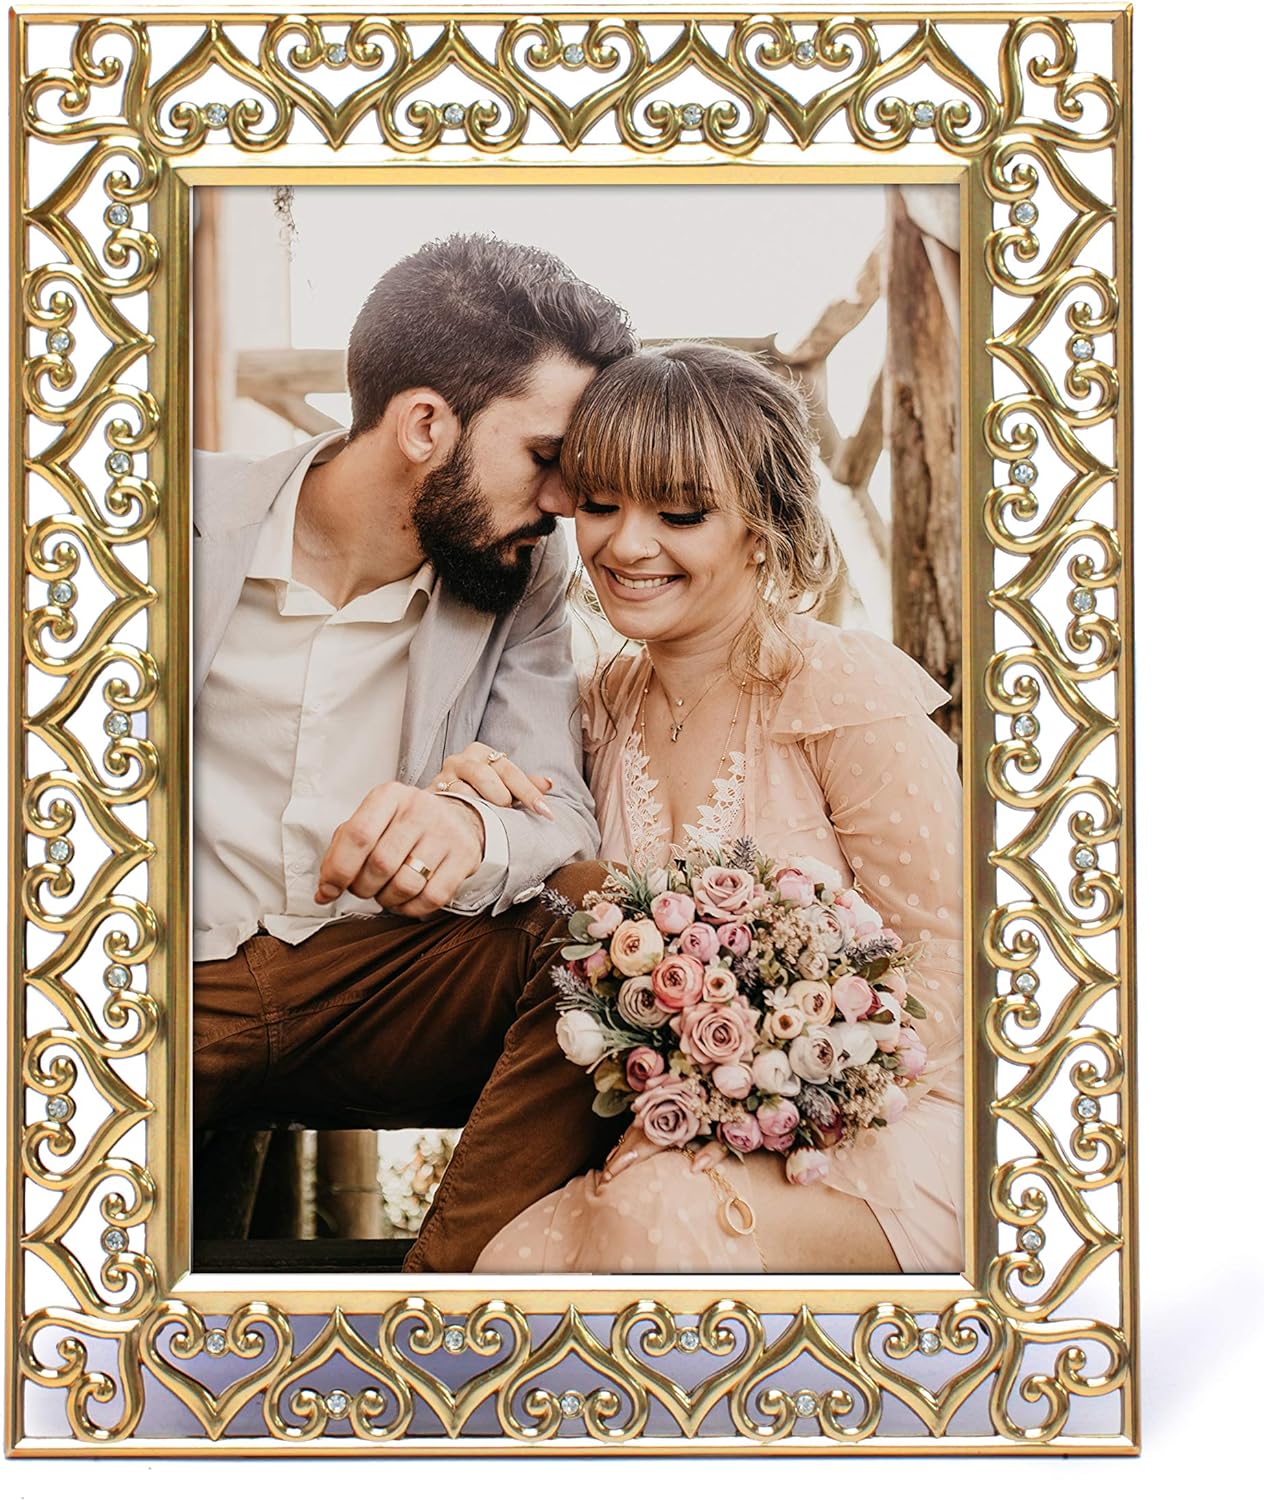 Mimosa Moments Photo Frame WholeSale - Price List, Bulk Buy at